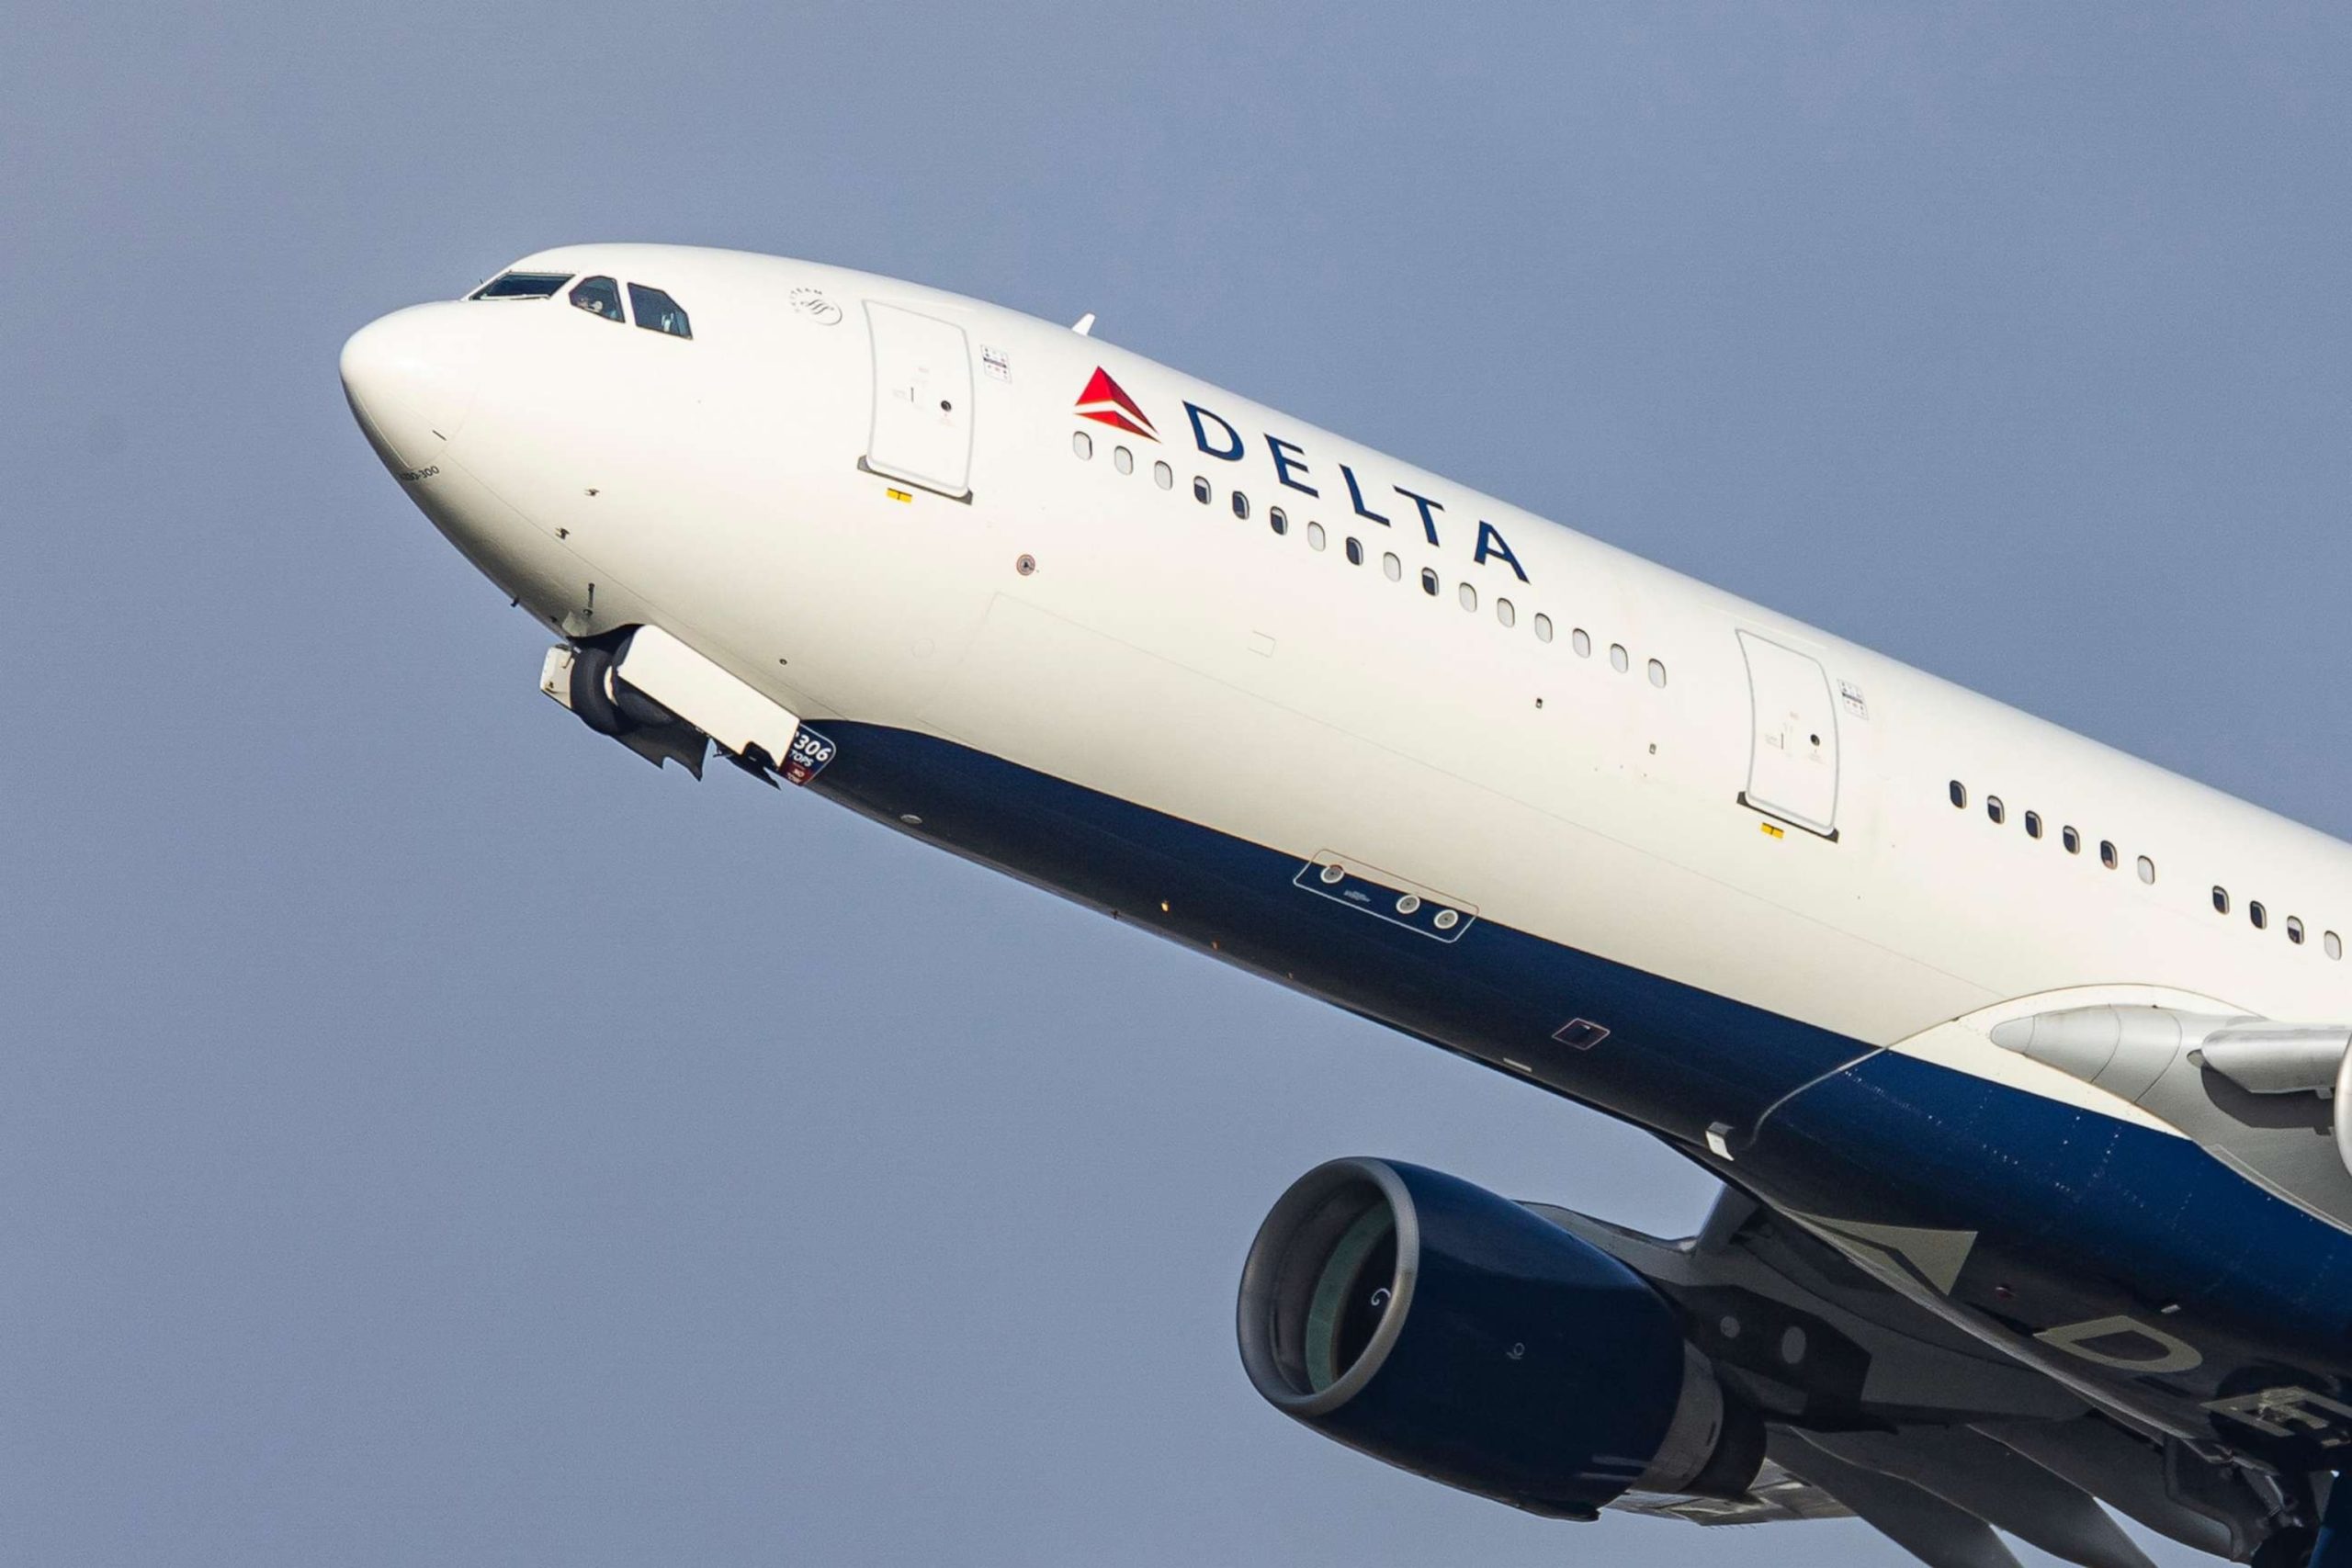 Indictment of Former Delta Pilot for Allegedly Threatening Co-Pilot with Gun During Flight